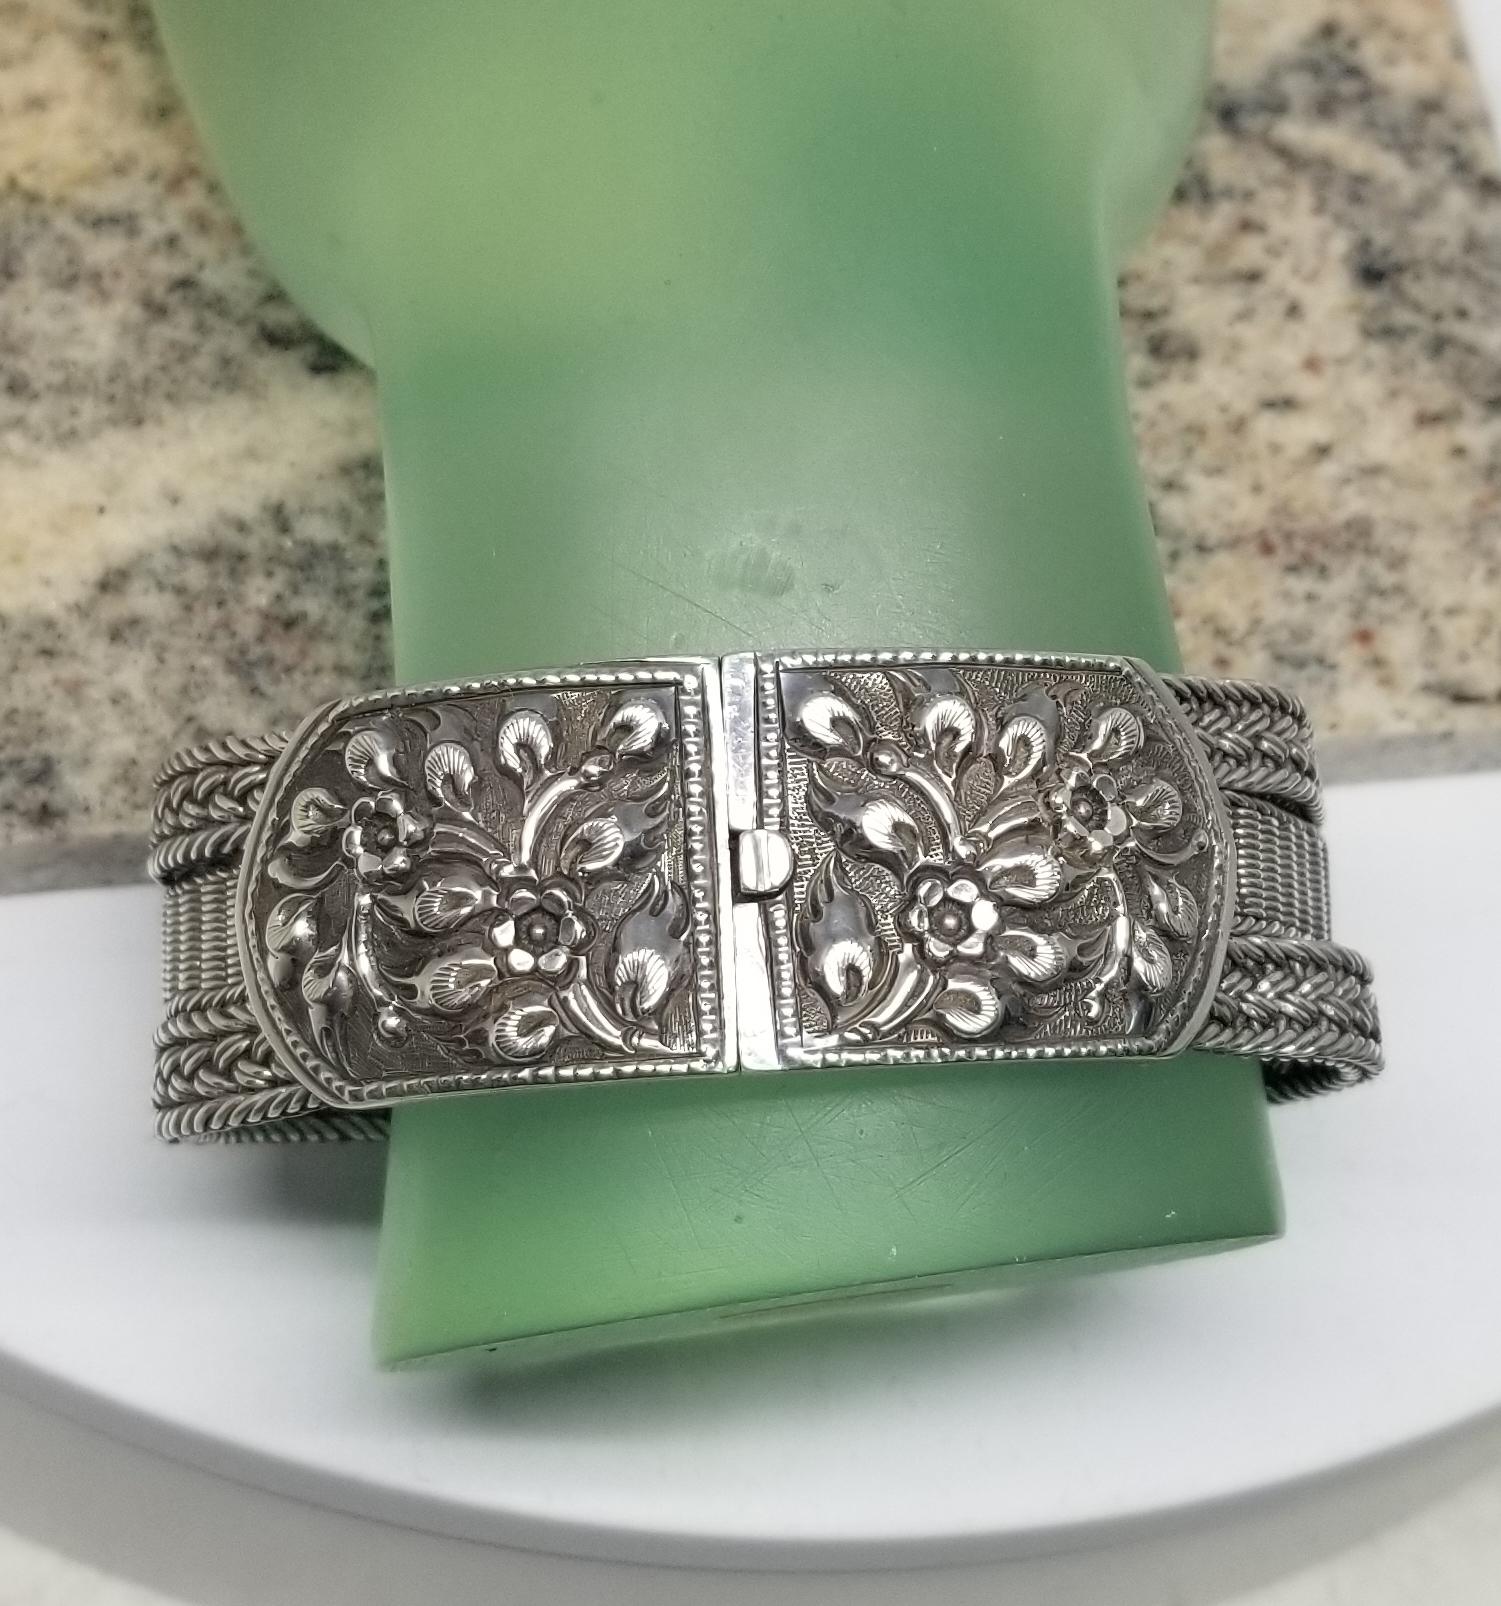 Women's or Men's Silver 3 row mesh bracelet with flower motif center and on clasp